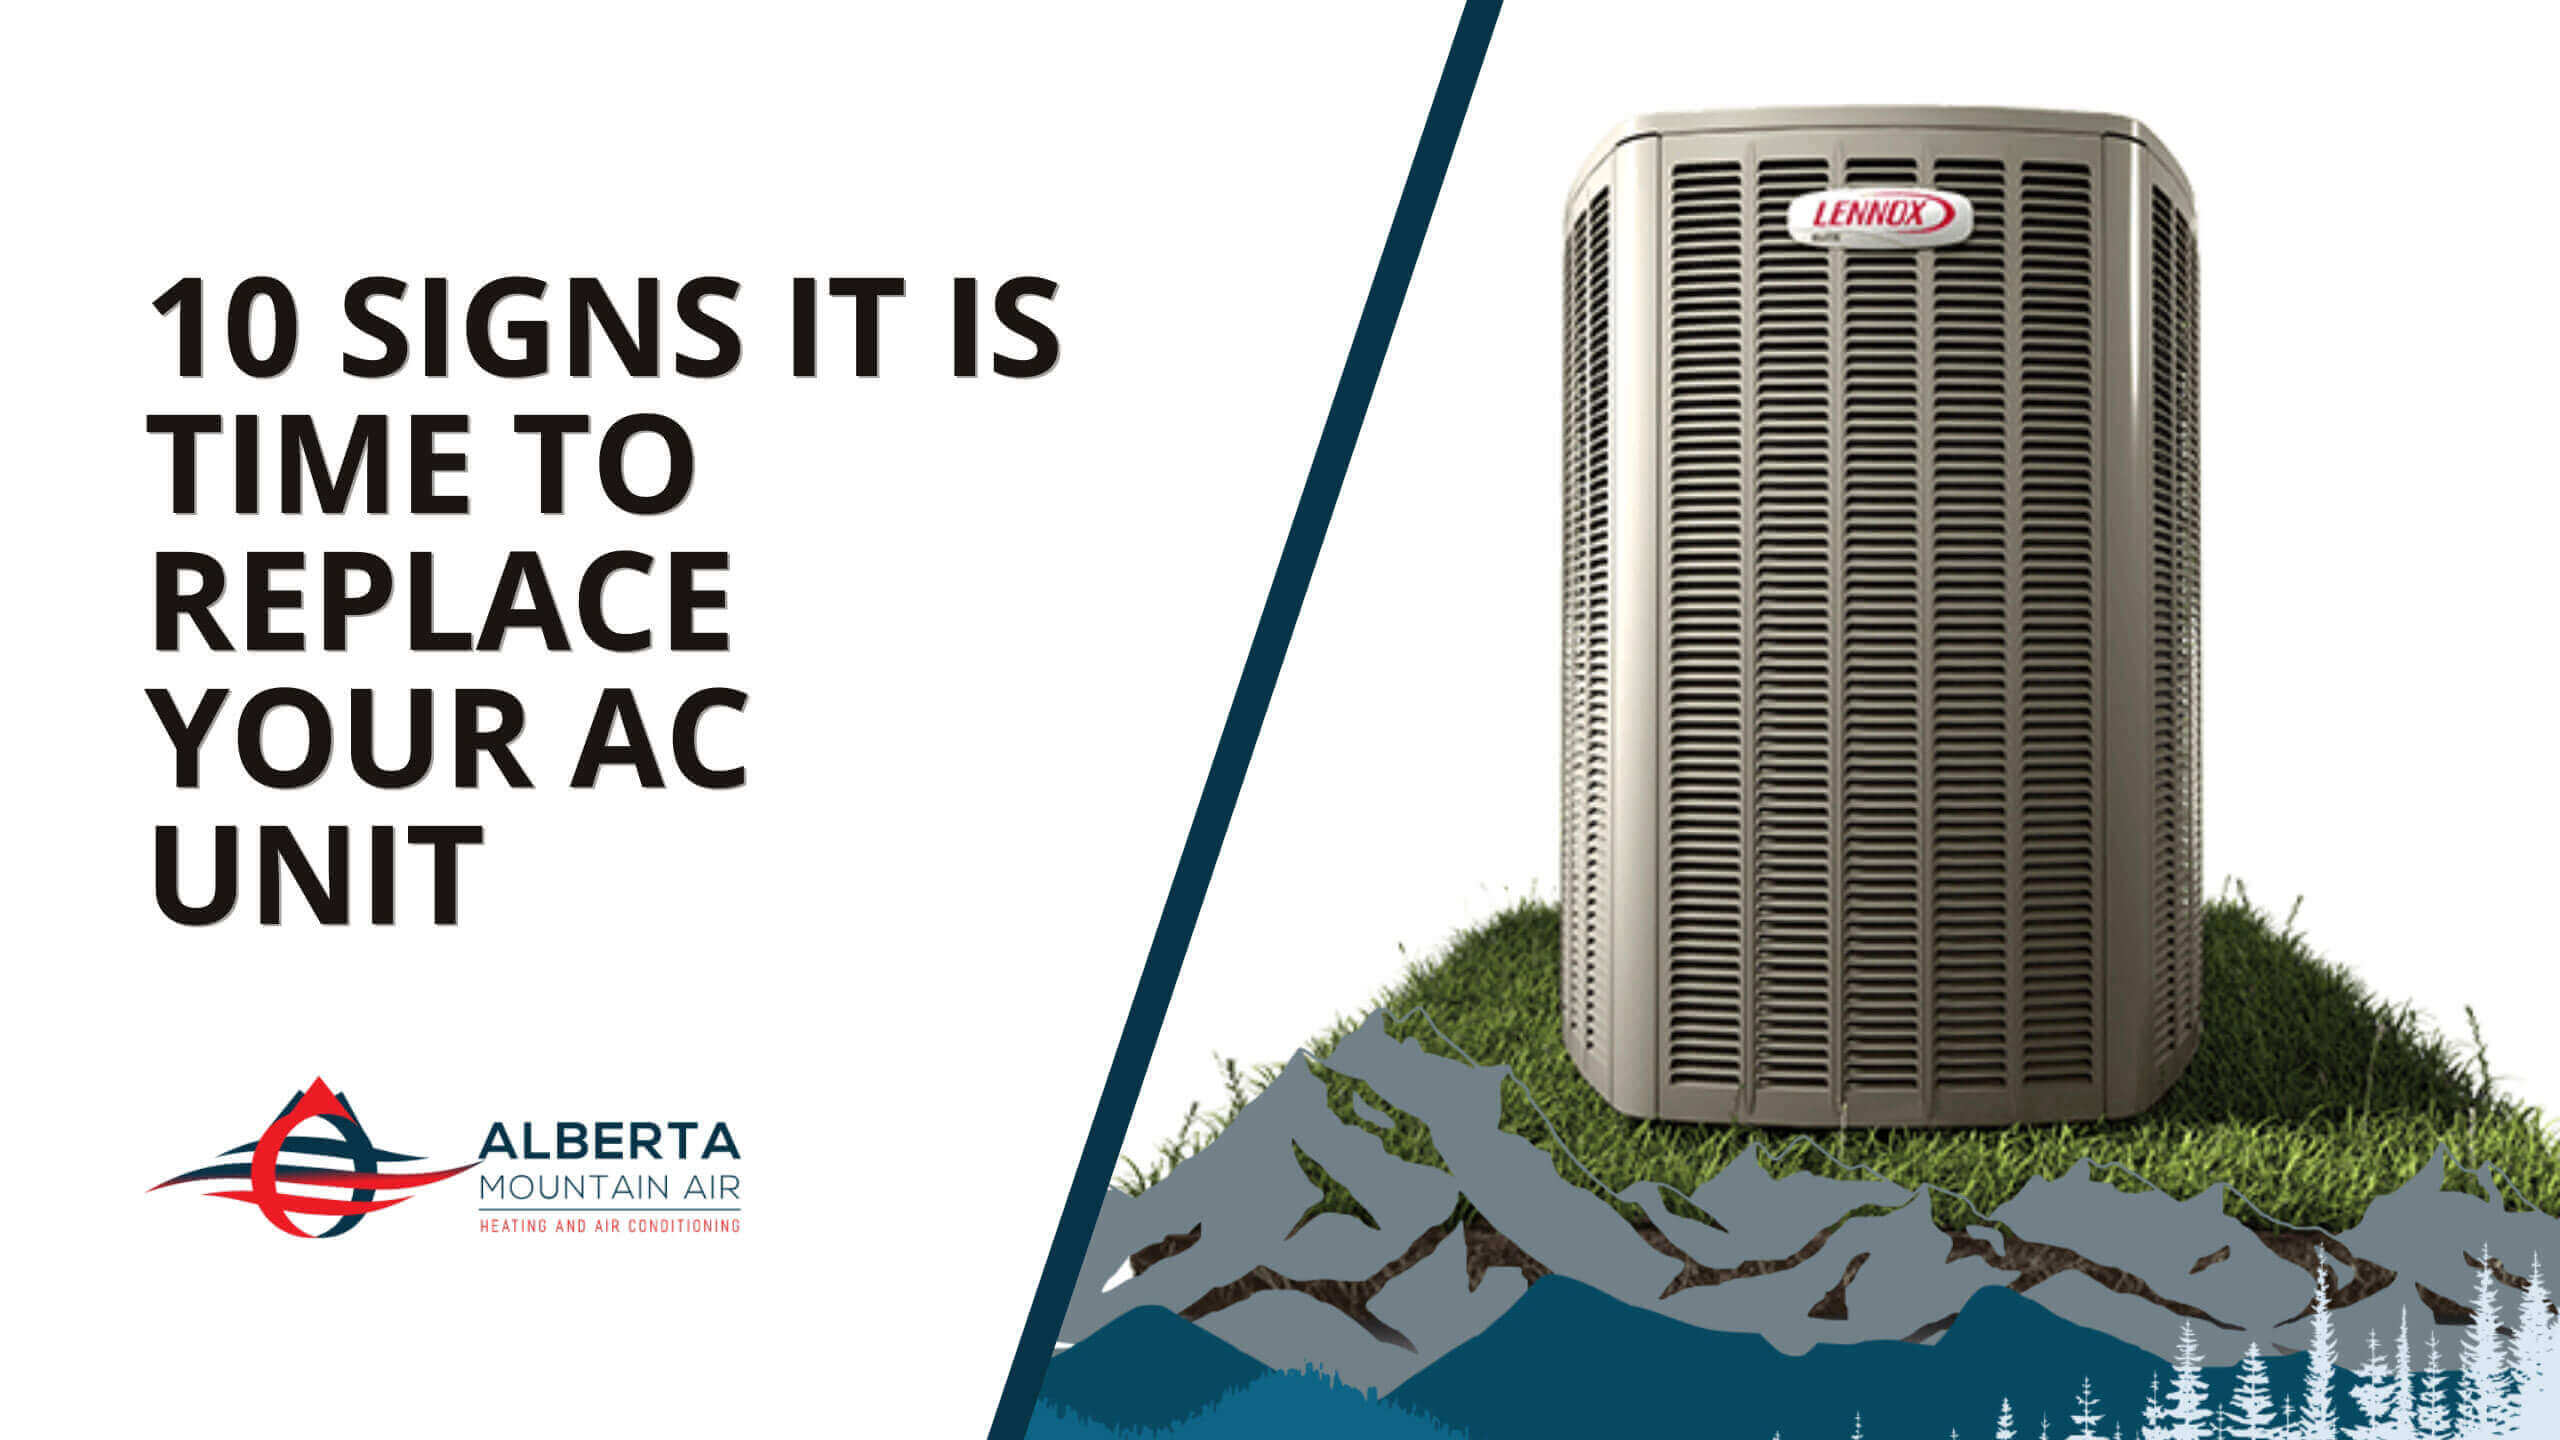 10 Signs It is Time to Replace Your AC Unit - When to Replace AC